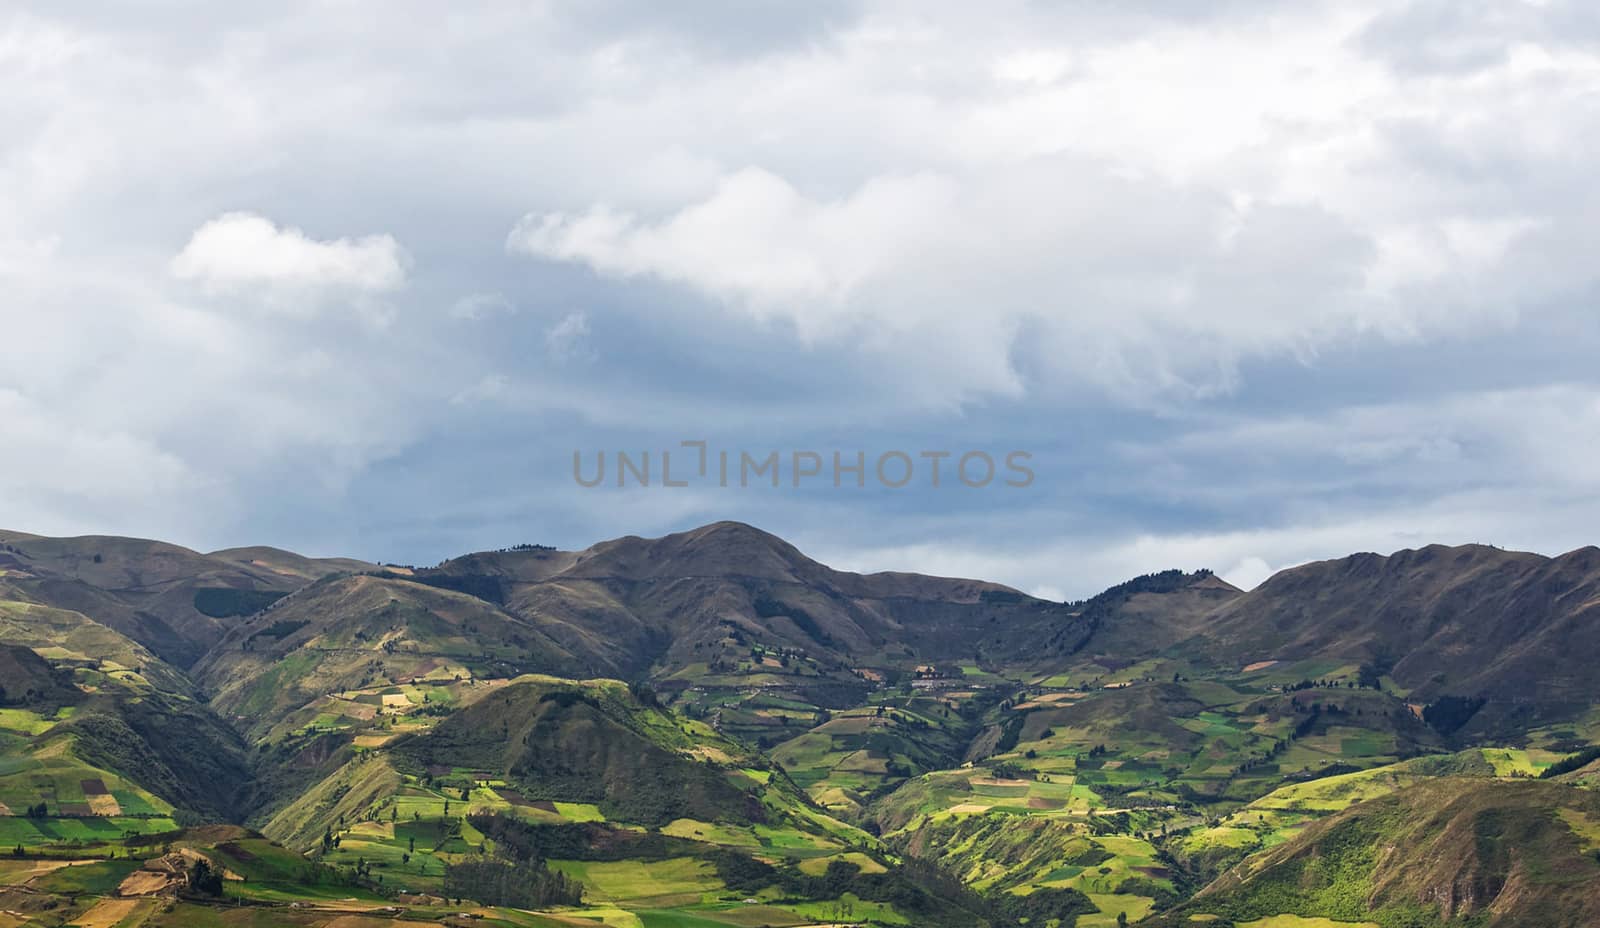 Beautiful pictures of Ecuador by TravelSync27